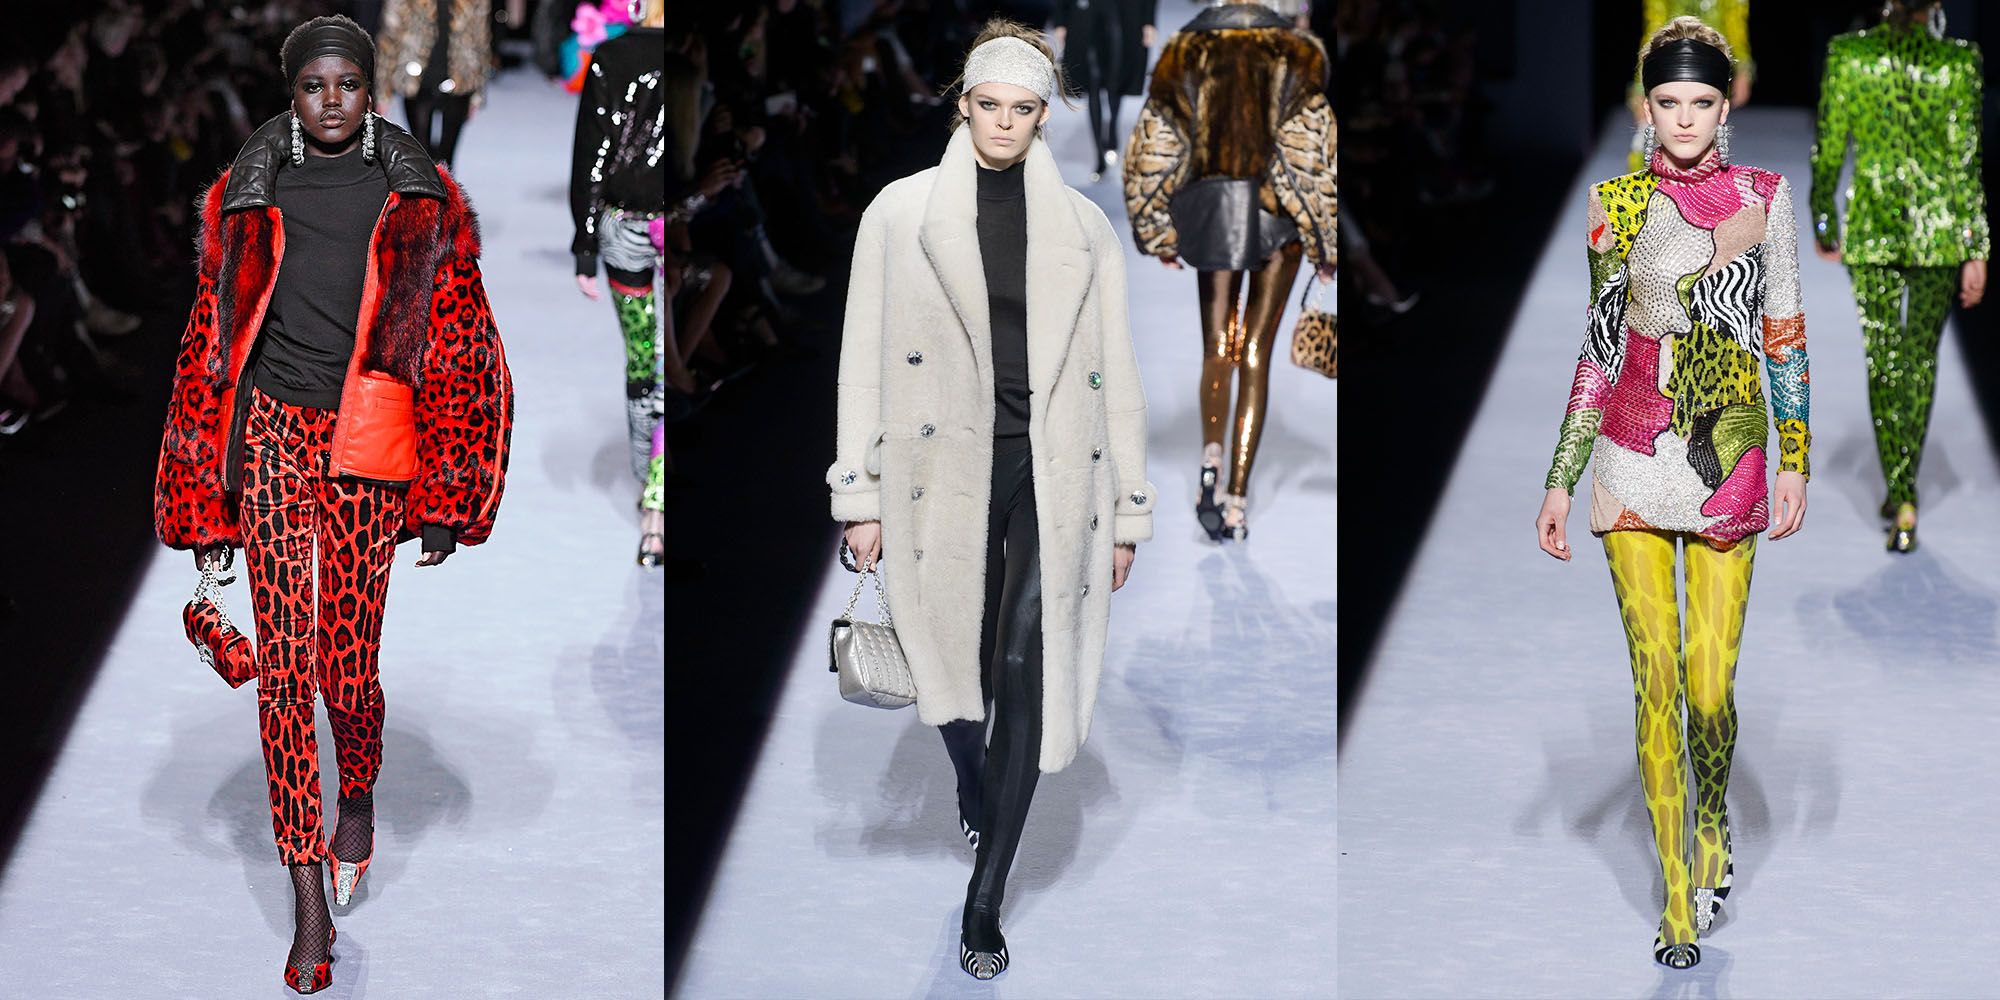 36 Looks From Tom Ford Fall 2018 NYFW Show – Tom Ford Runway at